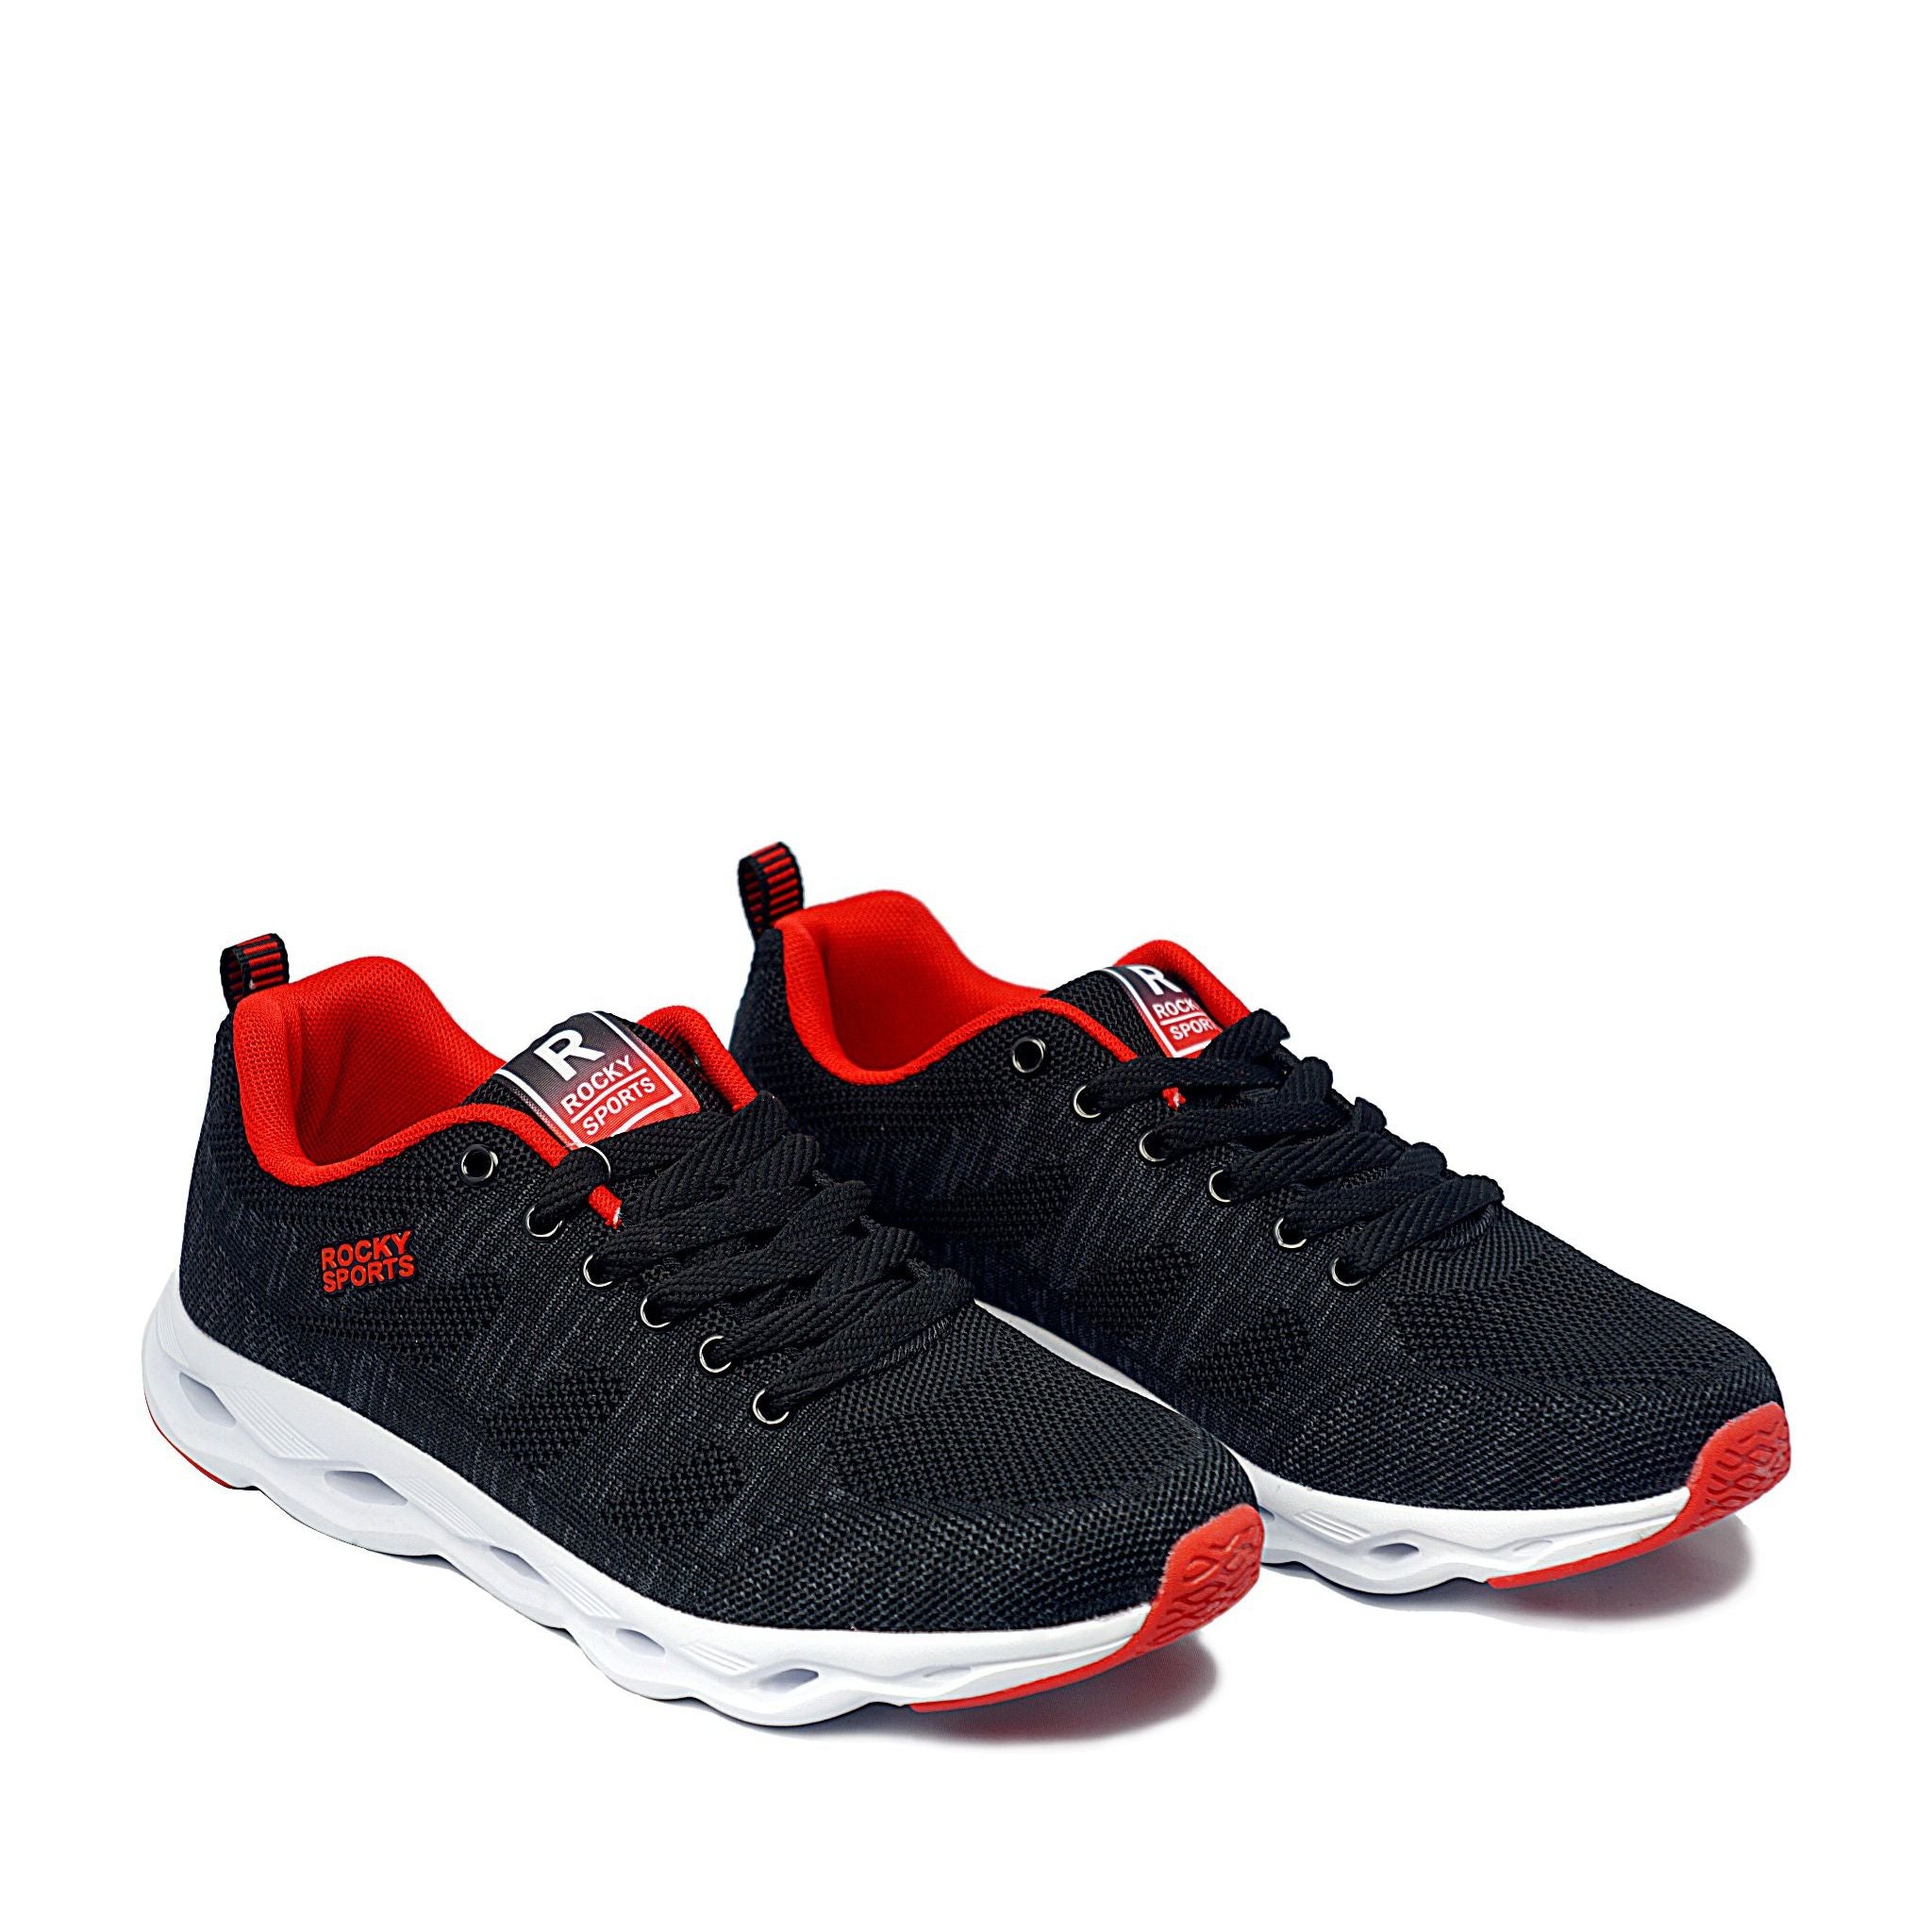 Shop Mens Sports Shoes online in Dubai and UAE